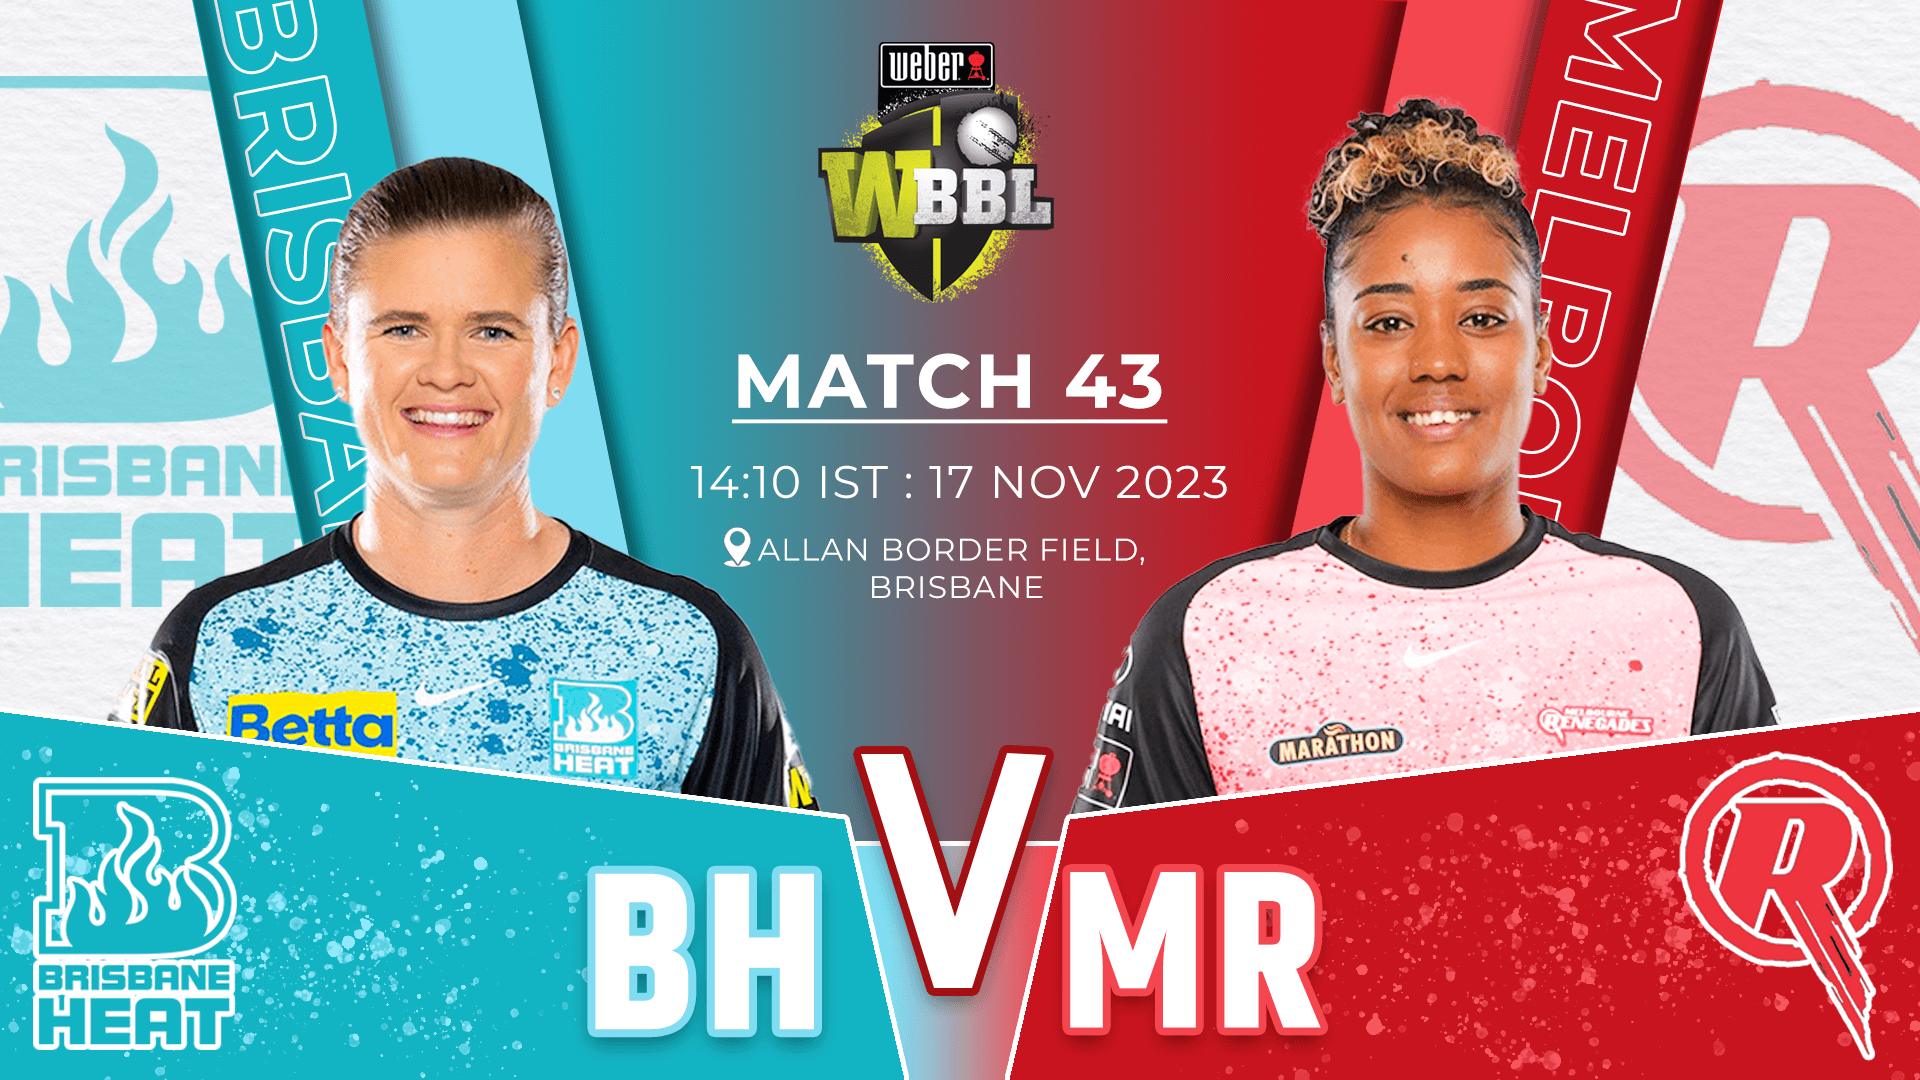 BH W vs MR W Dream11 Prediction, Pitch Report, Playing XI, Player Stats &  Injury Updates